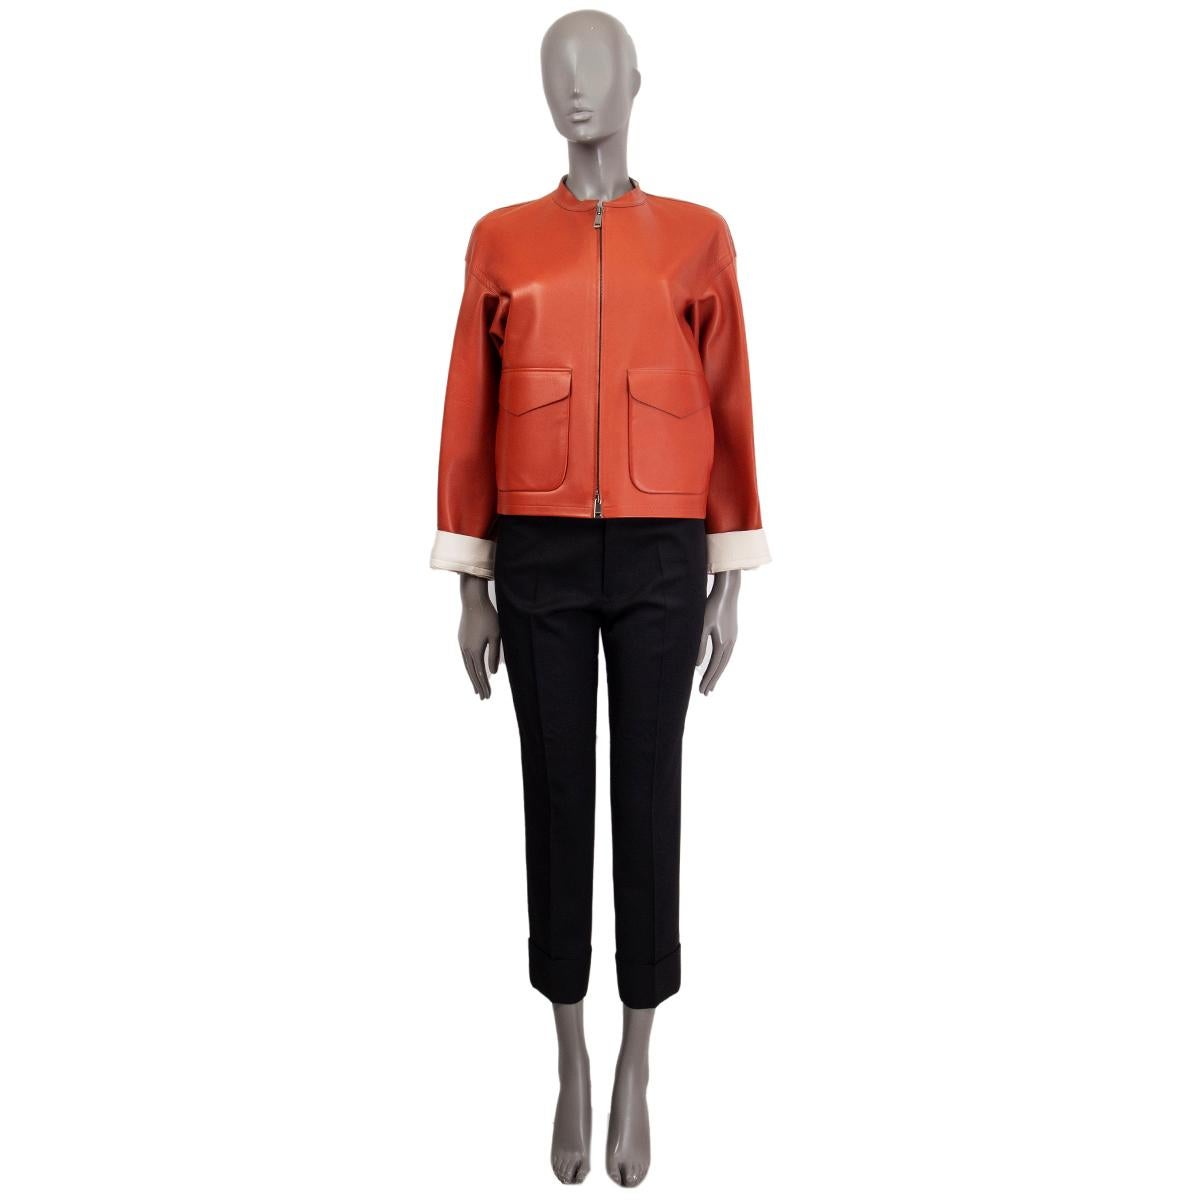 100% authentic Jil Sander bat sleeve short jacket in rust and off-white lambskin featuring two flap pockets and slit pockets at front. Opens with a zipper and is lined in off-white lambskin. Has been worn with some faint stains on the off-white part